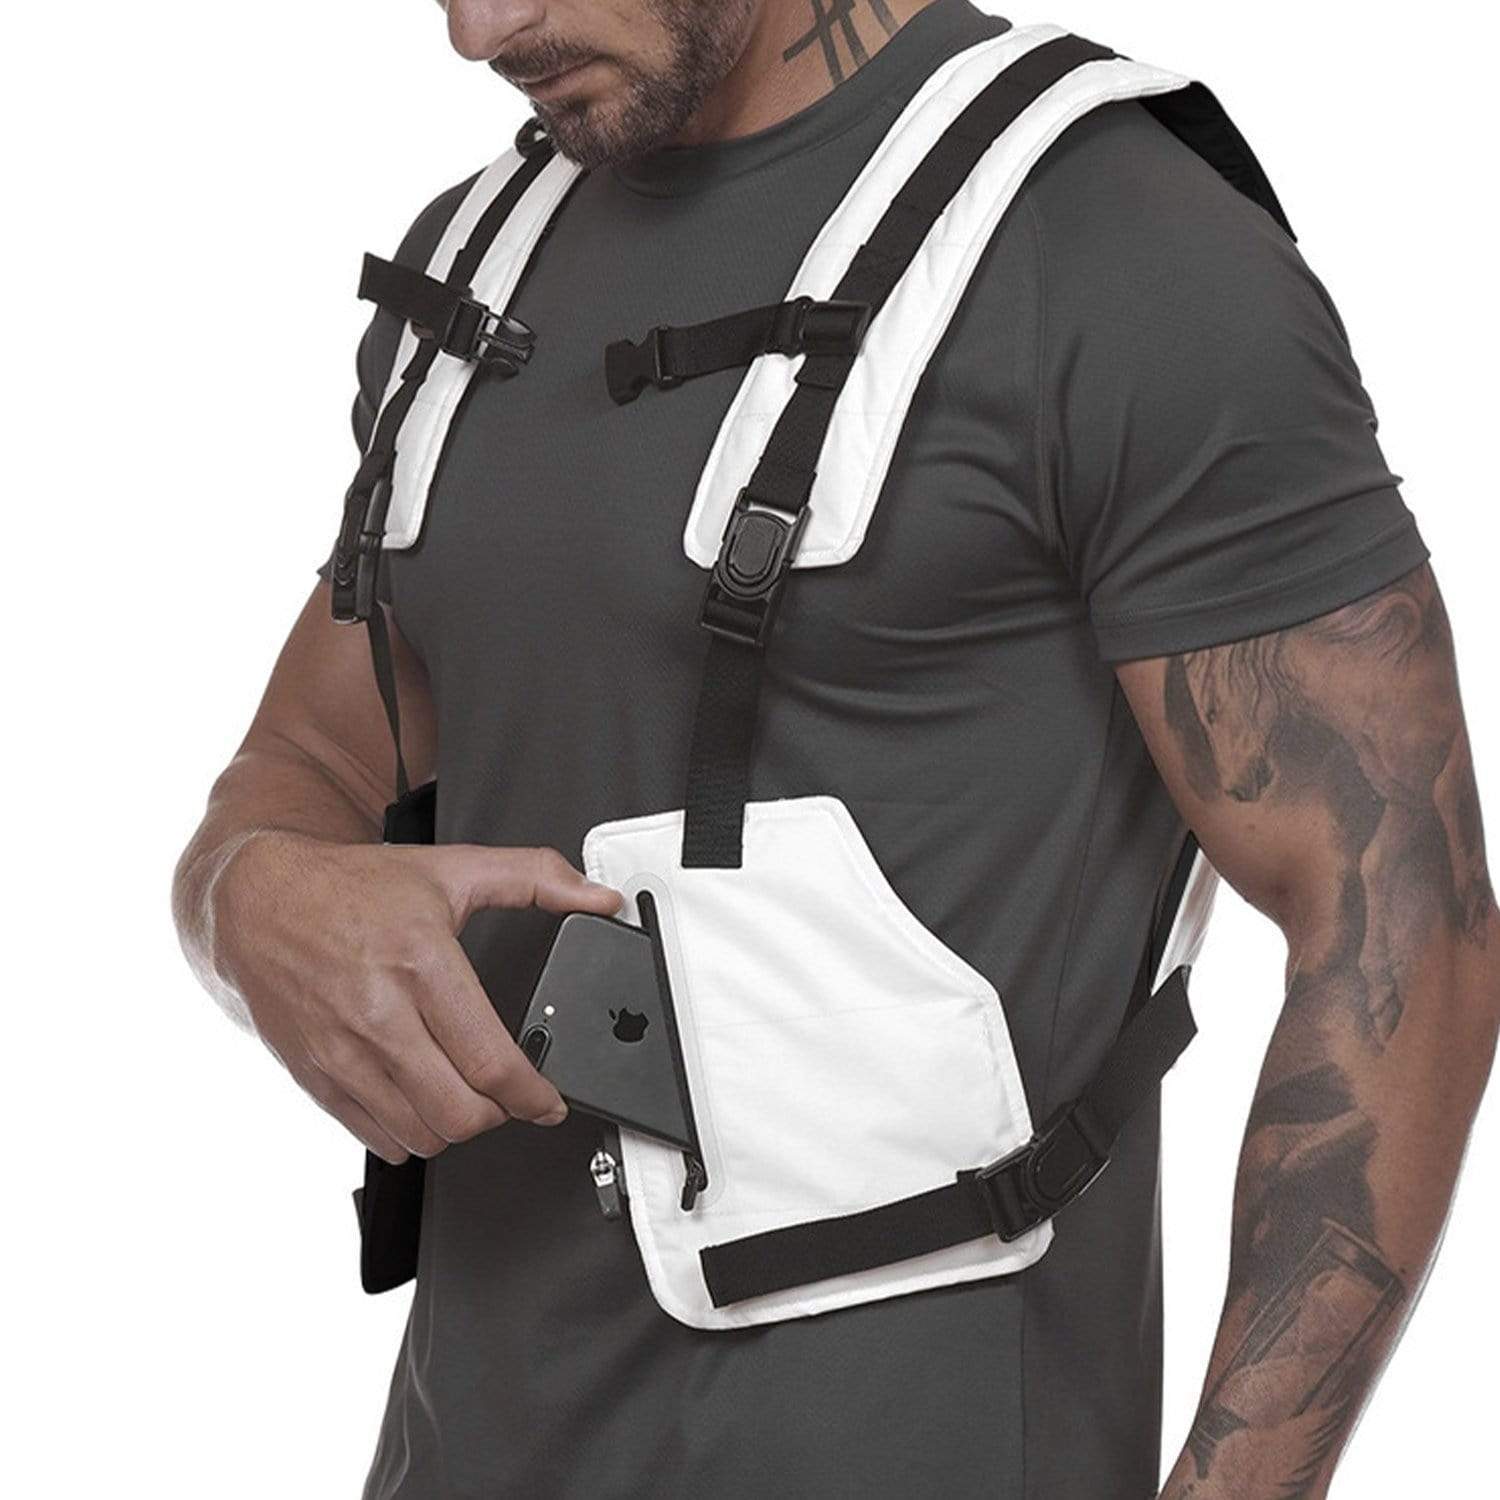 TO Tactical Vest